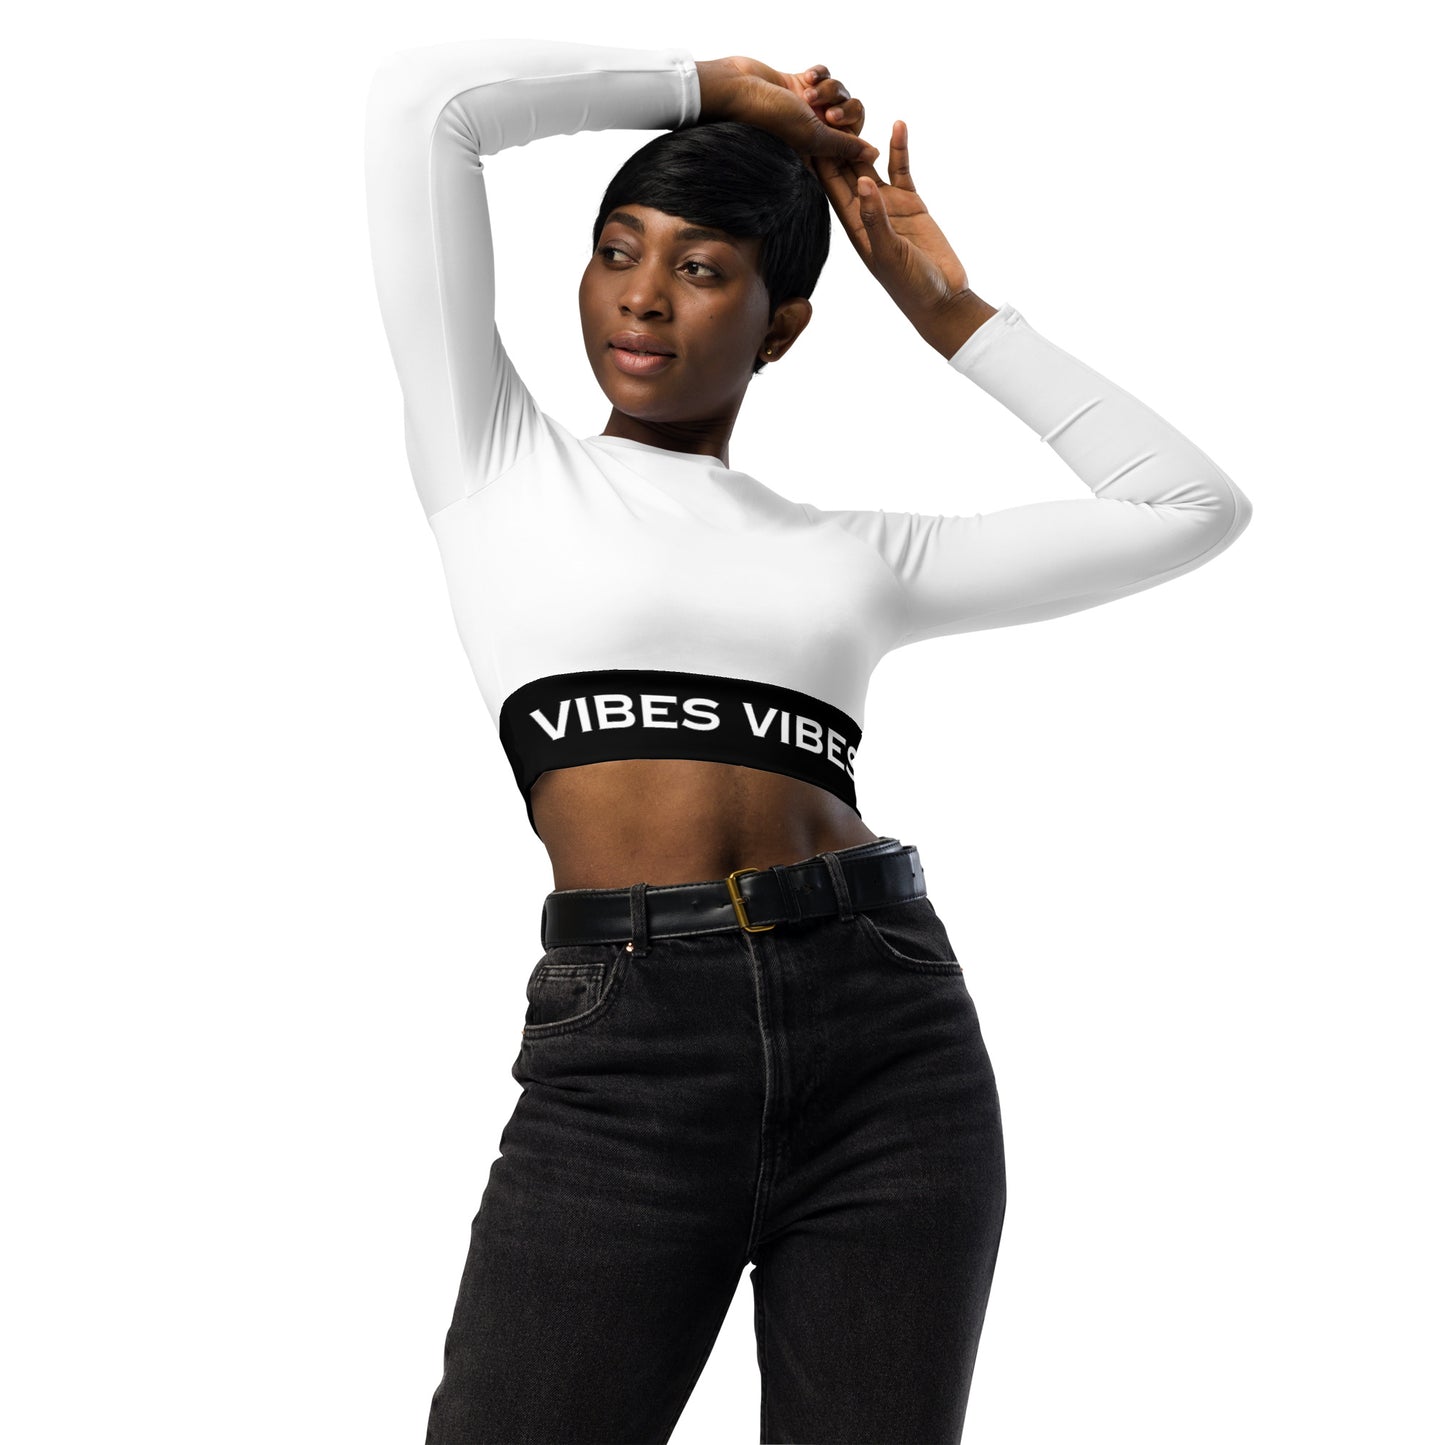 TIME OF VIBES - Recycled long-sleeve crop top VIBES (White/Black) - €54.00